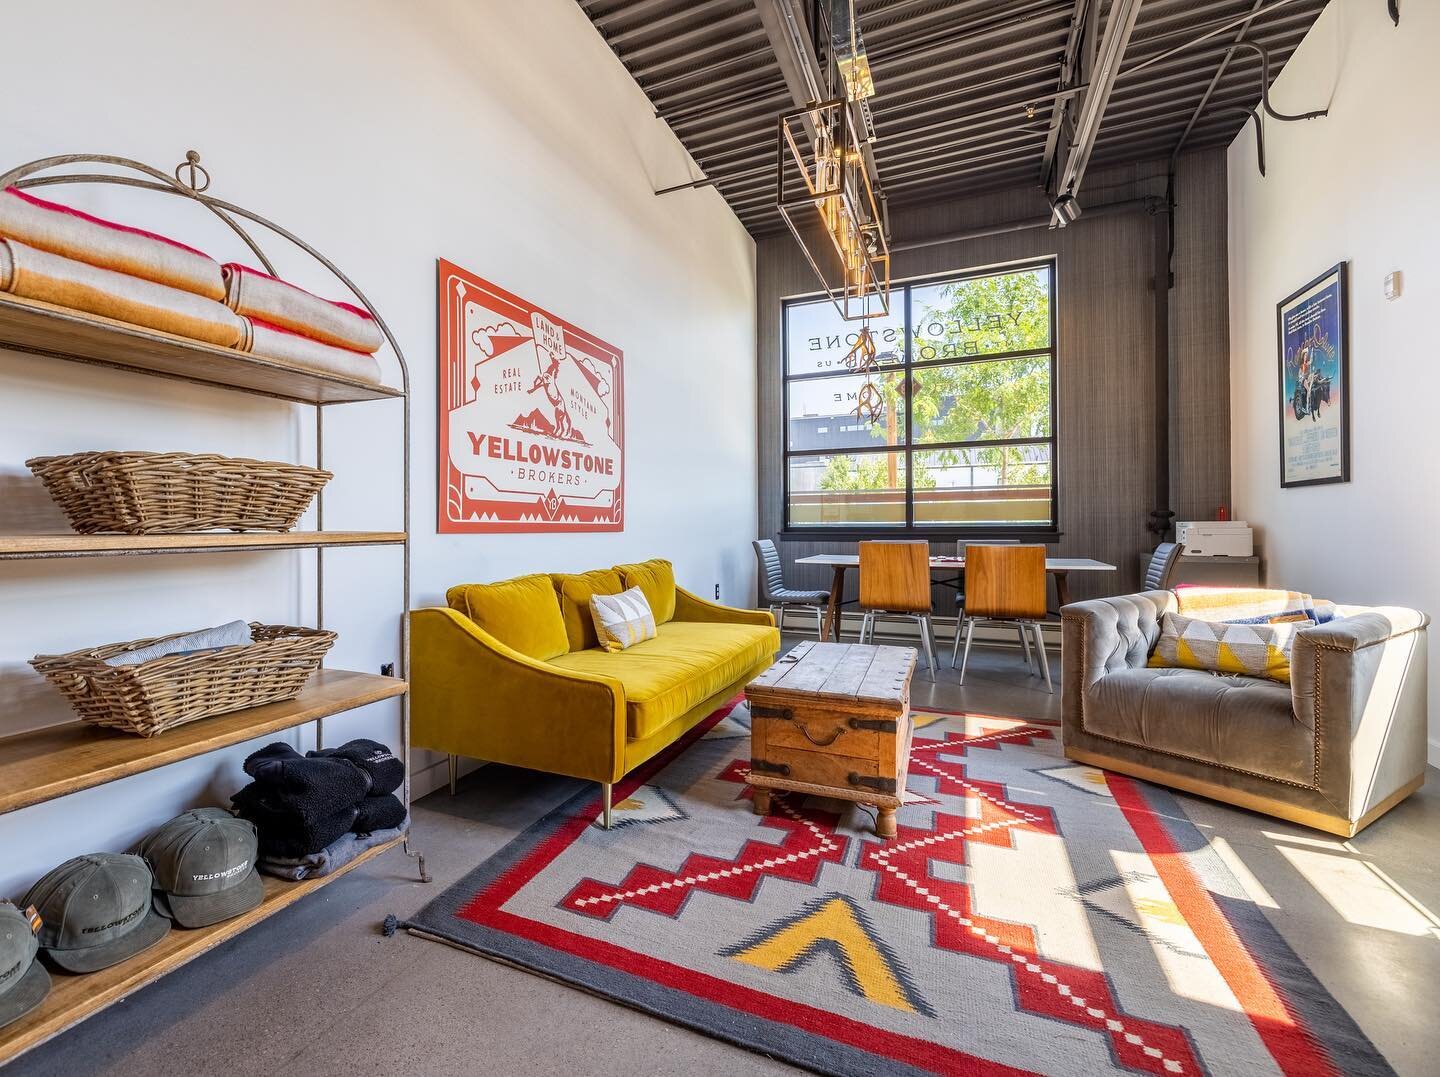 The new office of @yellowstone_brokers with all of its brilliant sun exposure, located in the @cannerydistrict in Bozeman.

#bozeman #yellowstonebrokers #yellowstone #bozeman #montana #bozemanmontana #cannerydistrict #realestate #office #realestateof